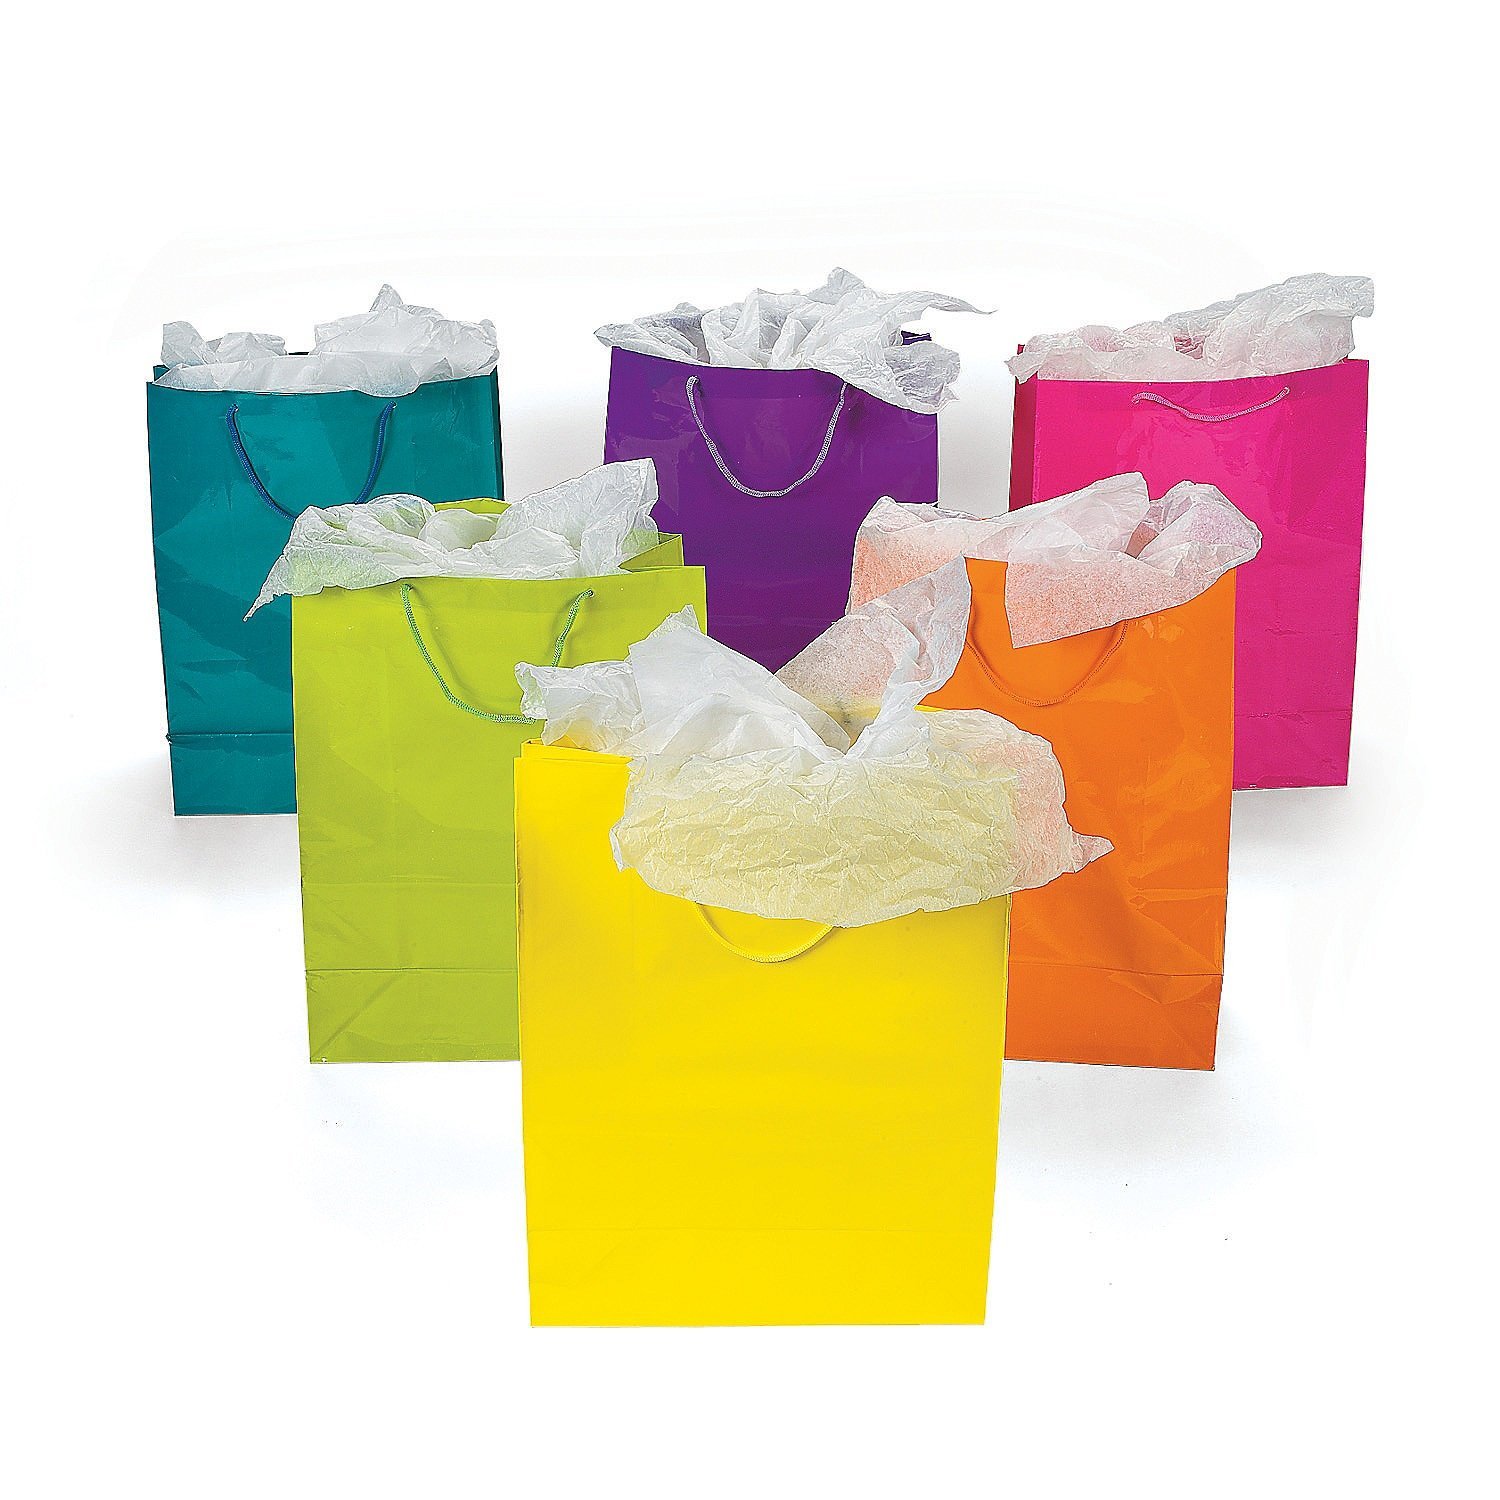 Details About 24pk Large Assorted Neon Bright Color Gift Bags Birthday Party Gift Supplies